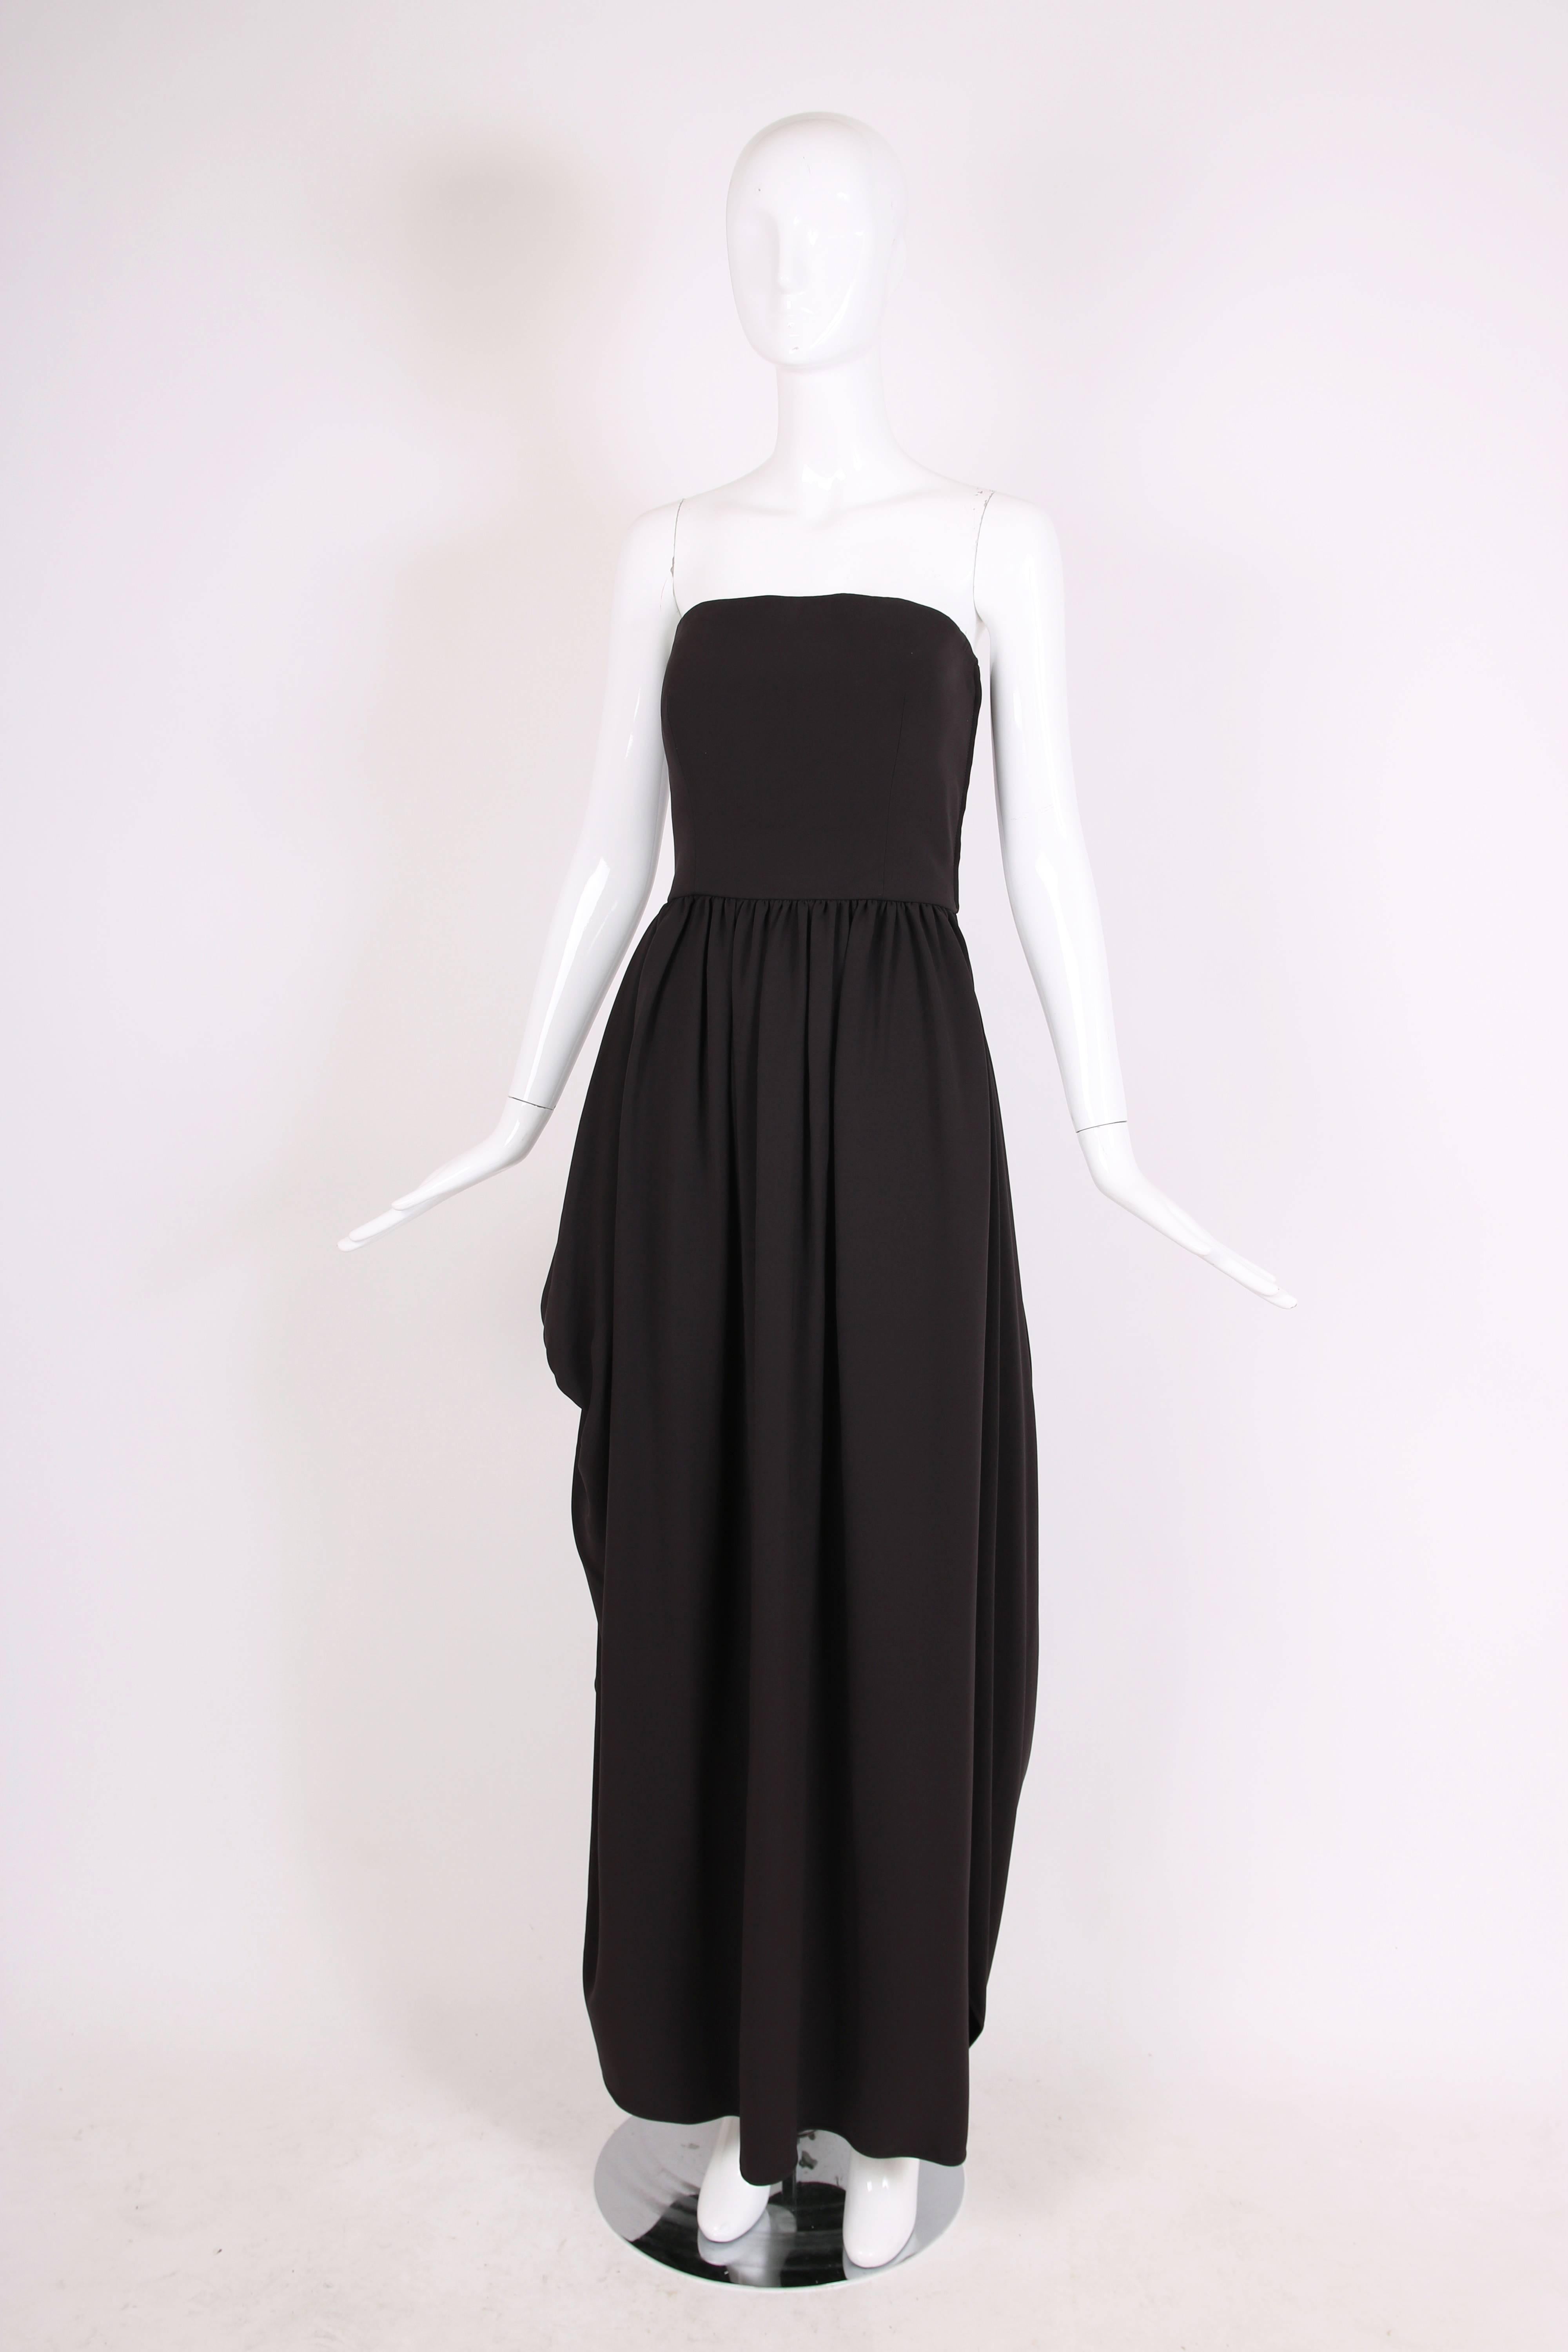 armani evening gown